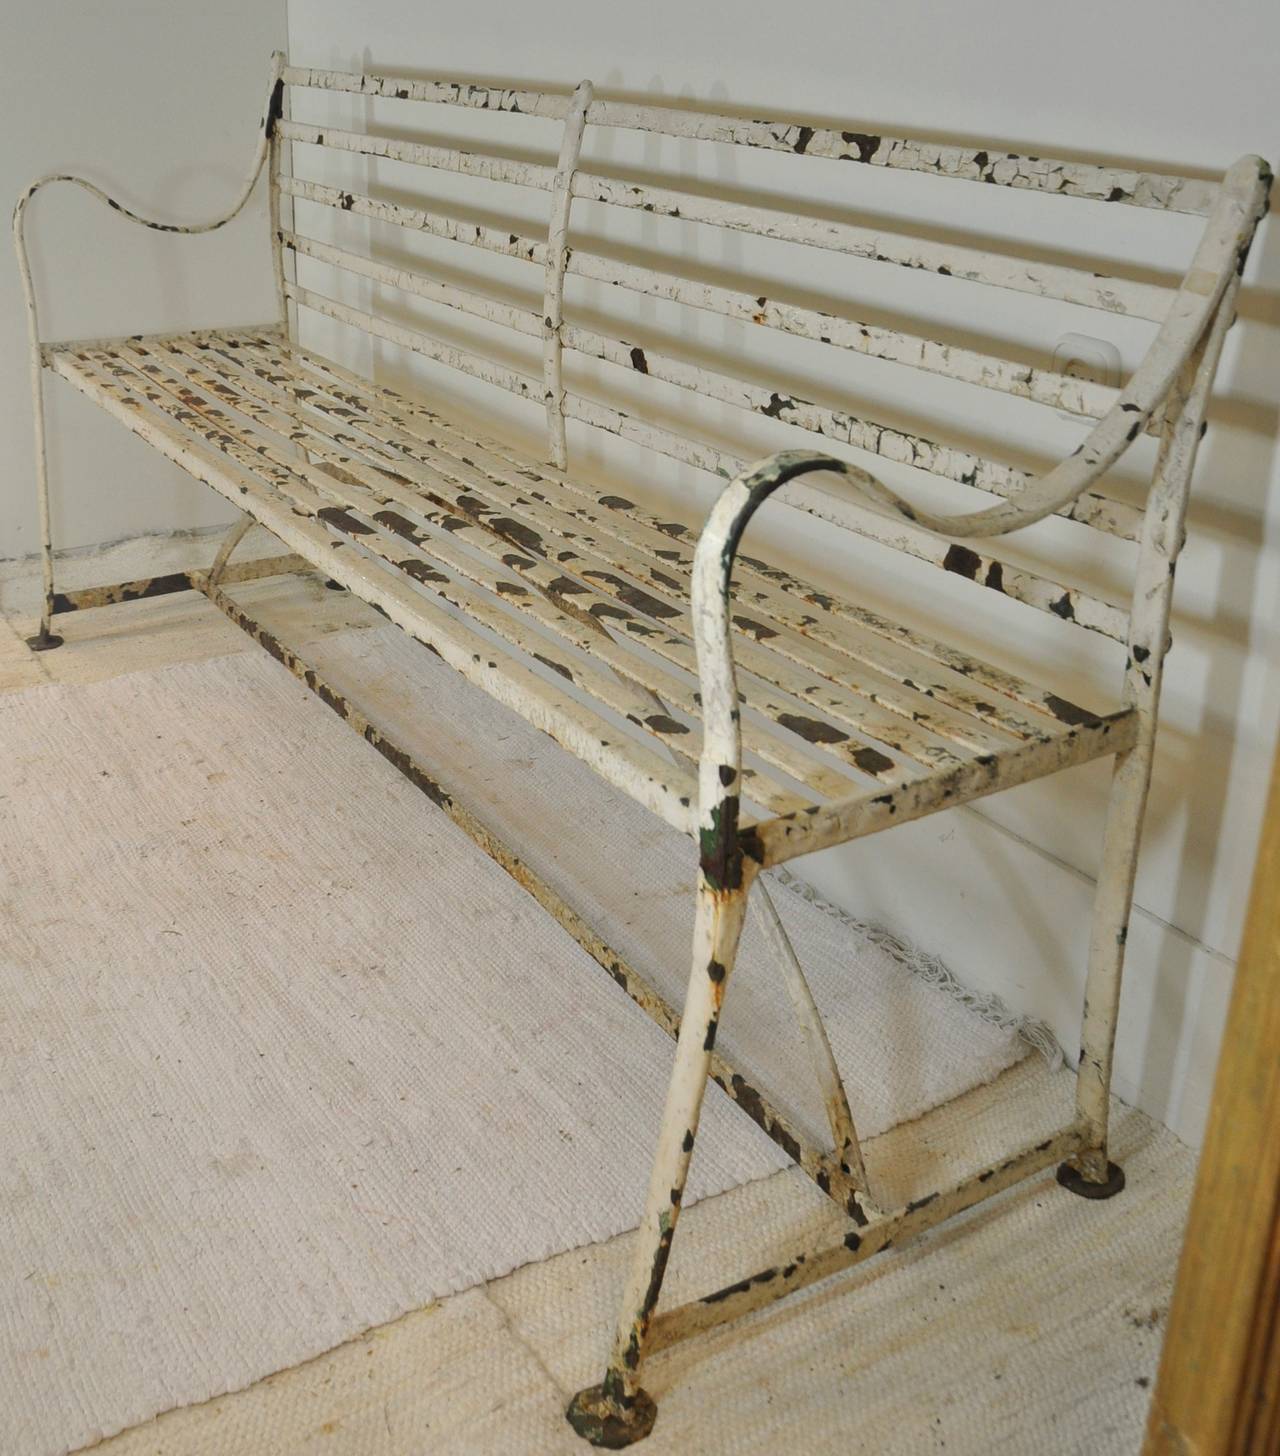 A charming 19th century wrought iron strap bench with a comfortable curved back. The structural condition is excellent. The paint is peeling showing some rust but can also be sandblasted, primed and painted.